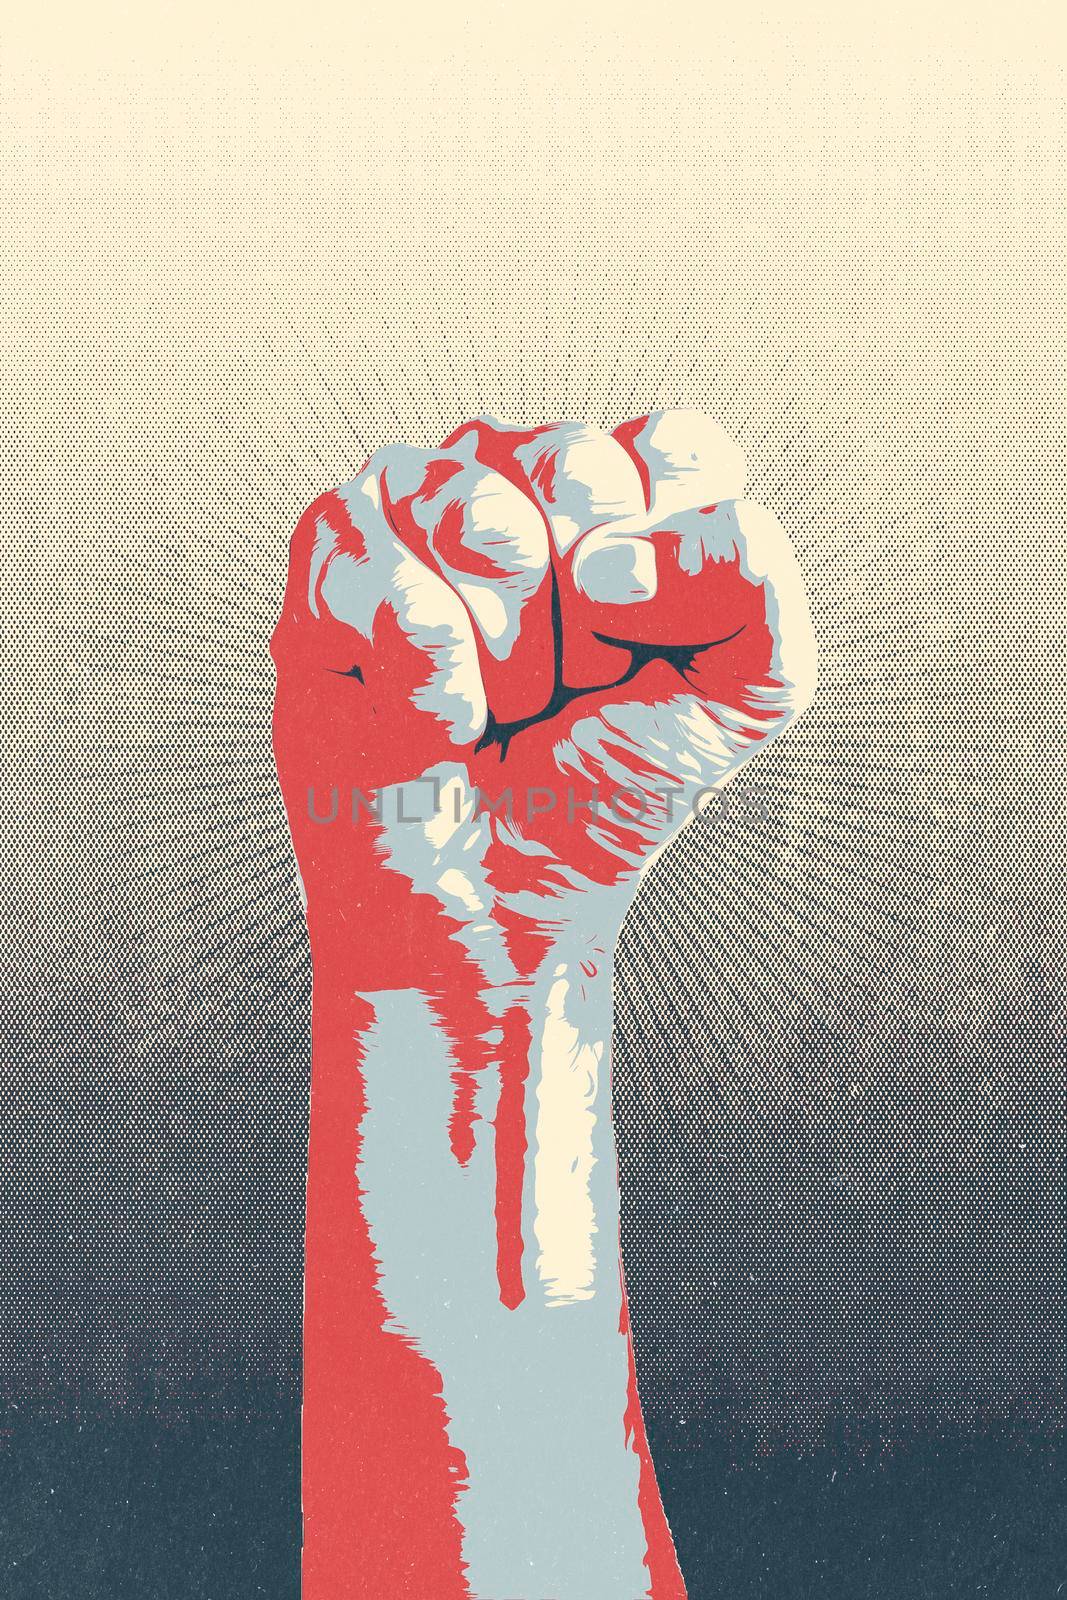 Raised fist concept. Digital draw of a man closed fist by bepsimage